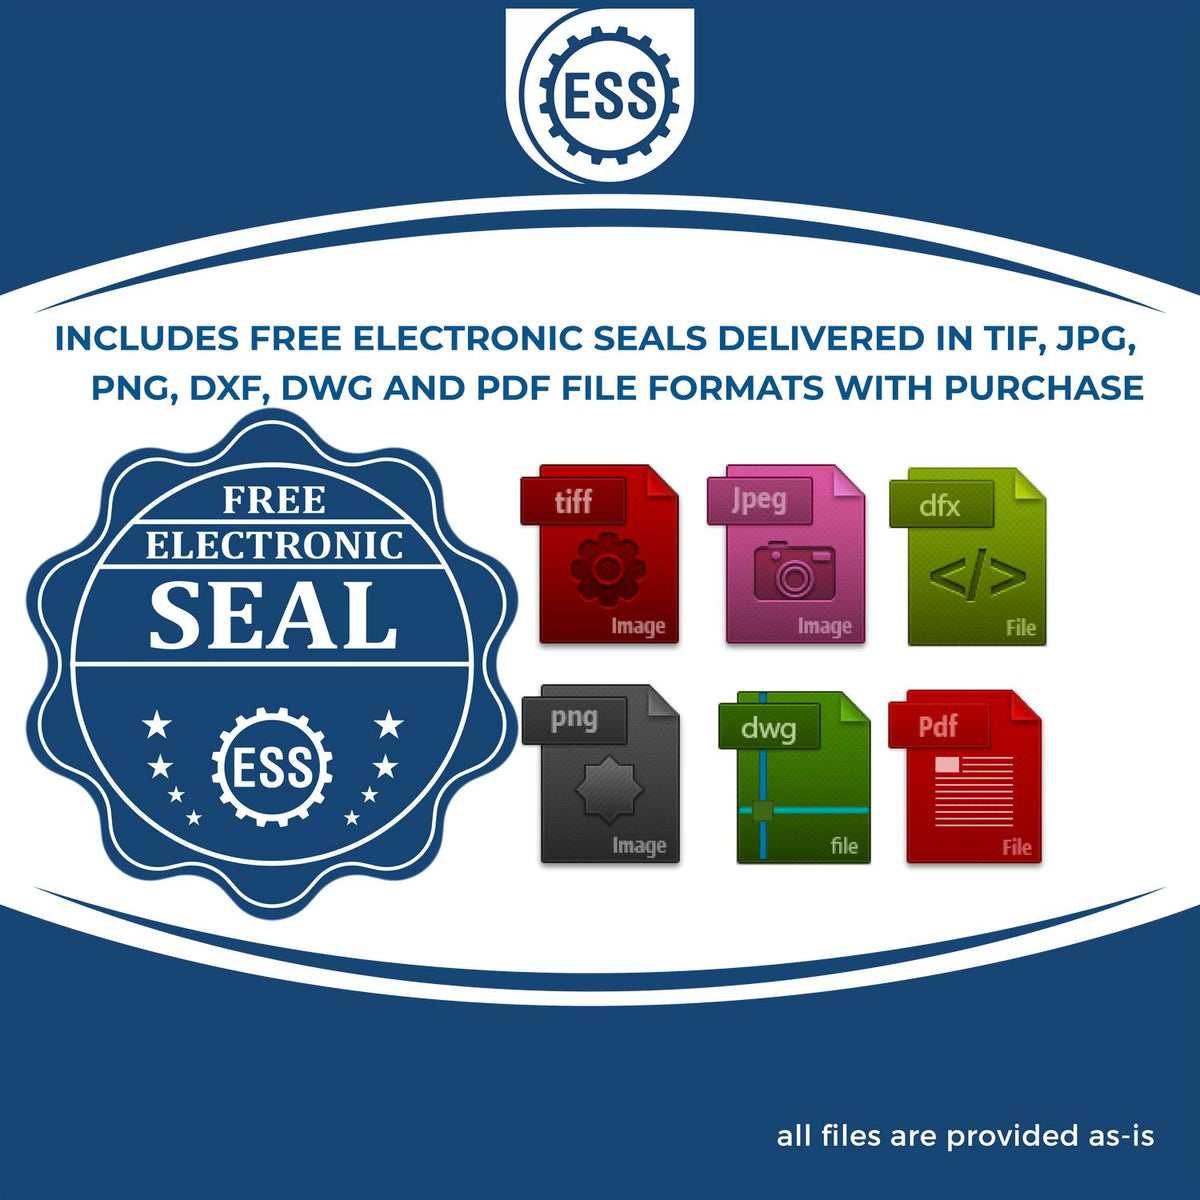 An infographic for the free electronic seal for the Gift Alaska Landscape Architect Seal illustrating the different file type icons such as DXF, DWG, TIF, JPG and PNG.